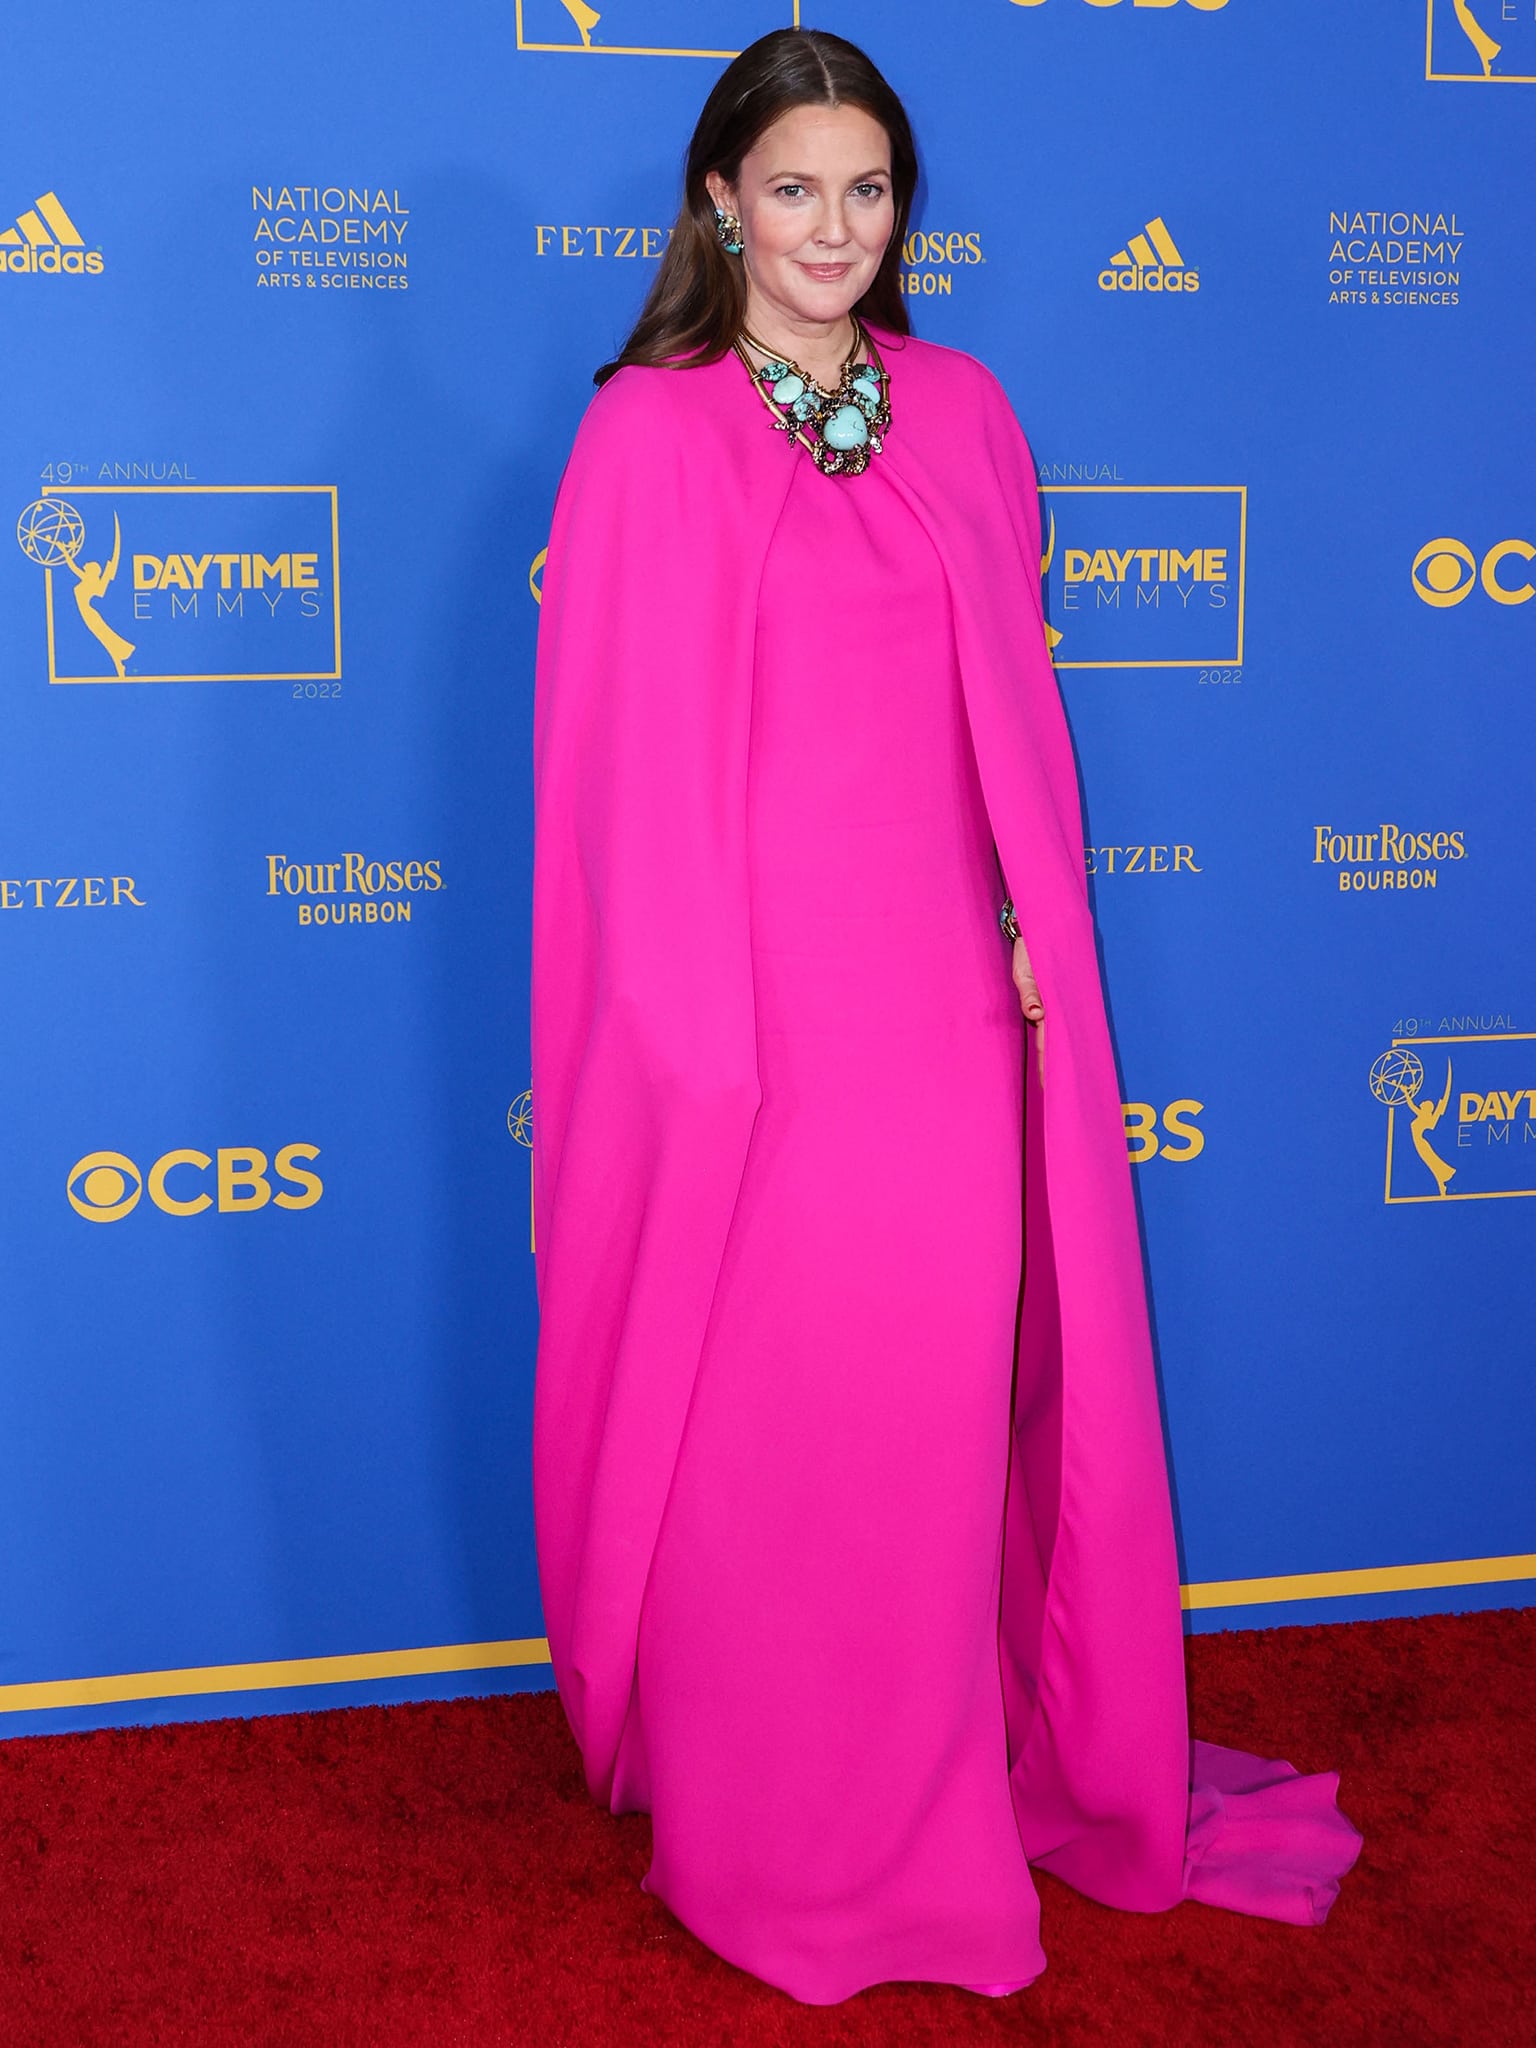 Drew Barrymore stuns in pink at the 49th Daytime Emmy Awards held at the Pasadena Civic Auditorium on June 24, 2022